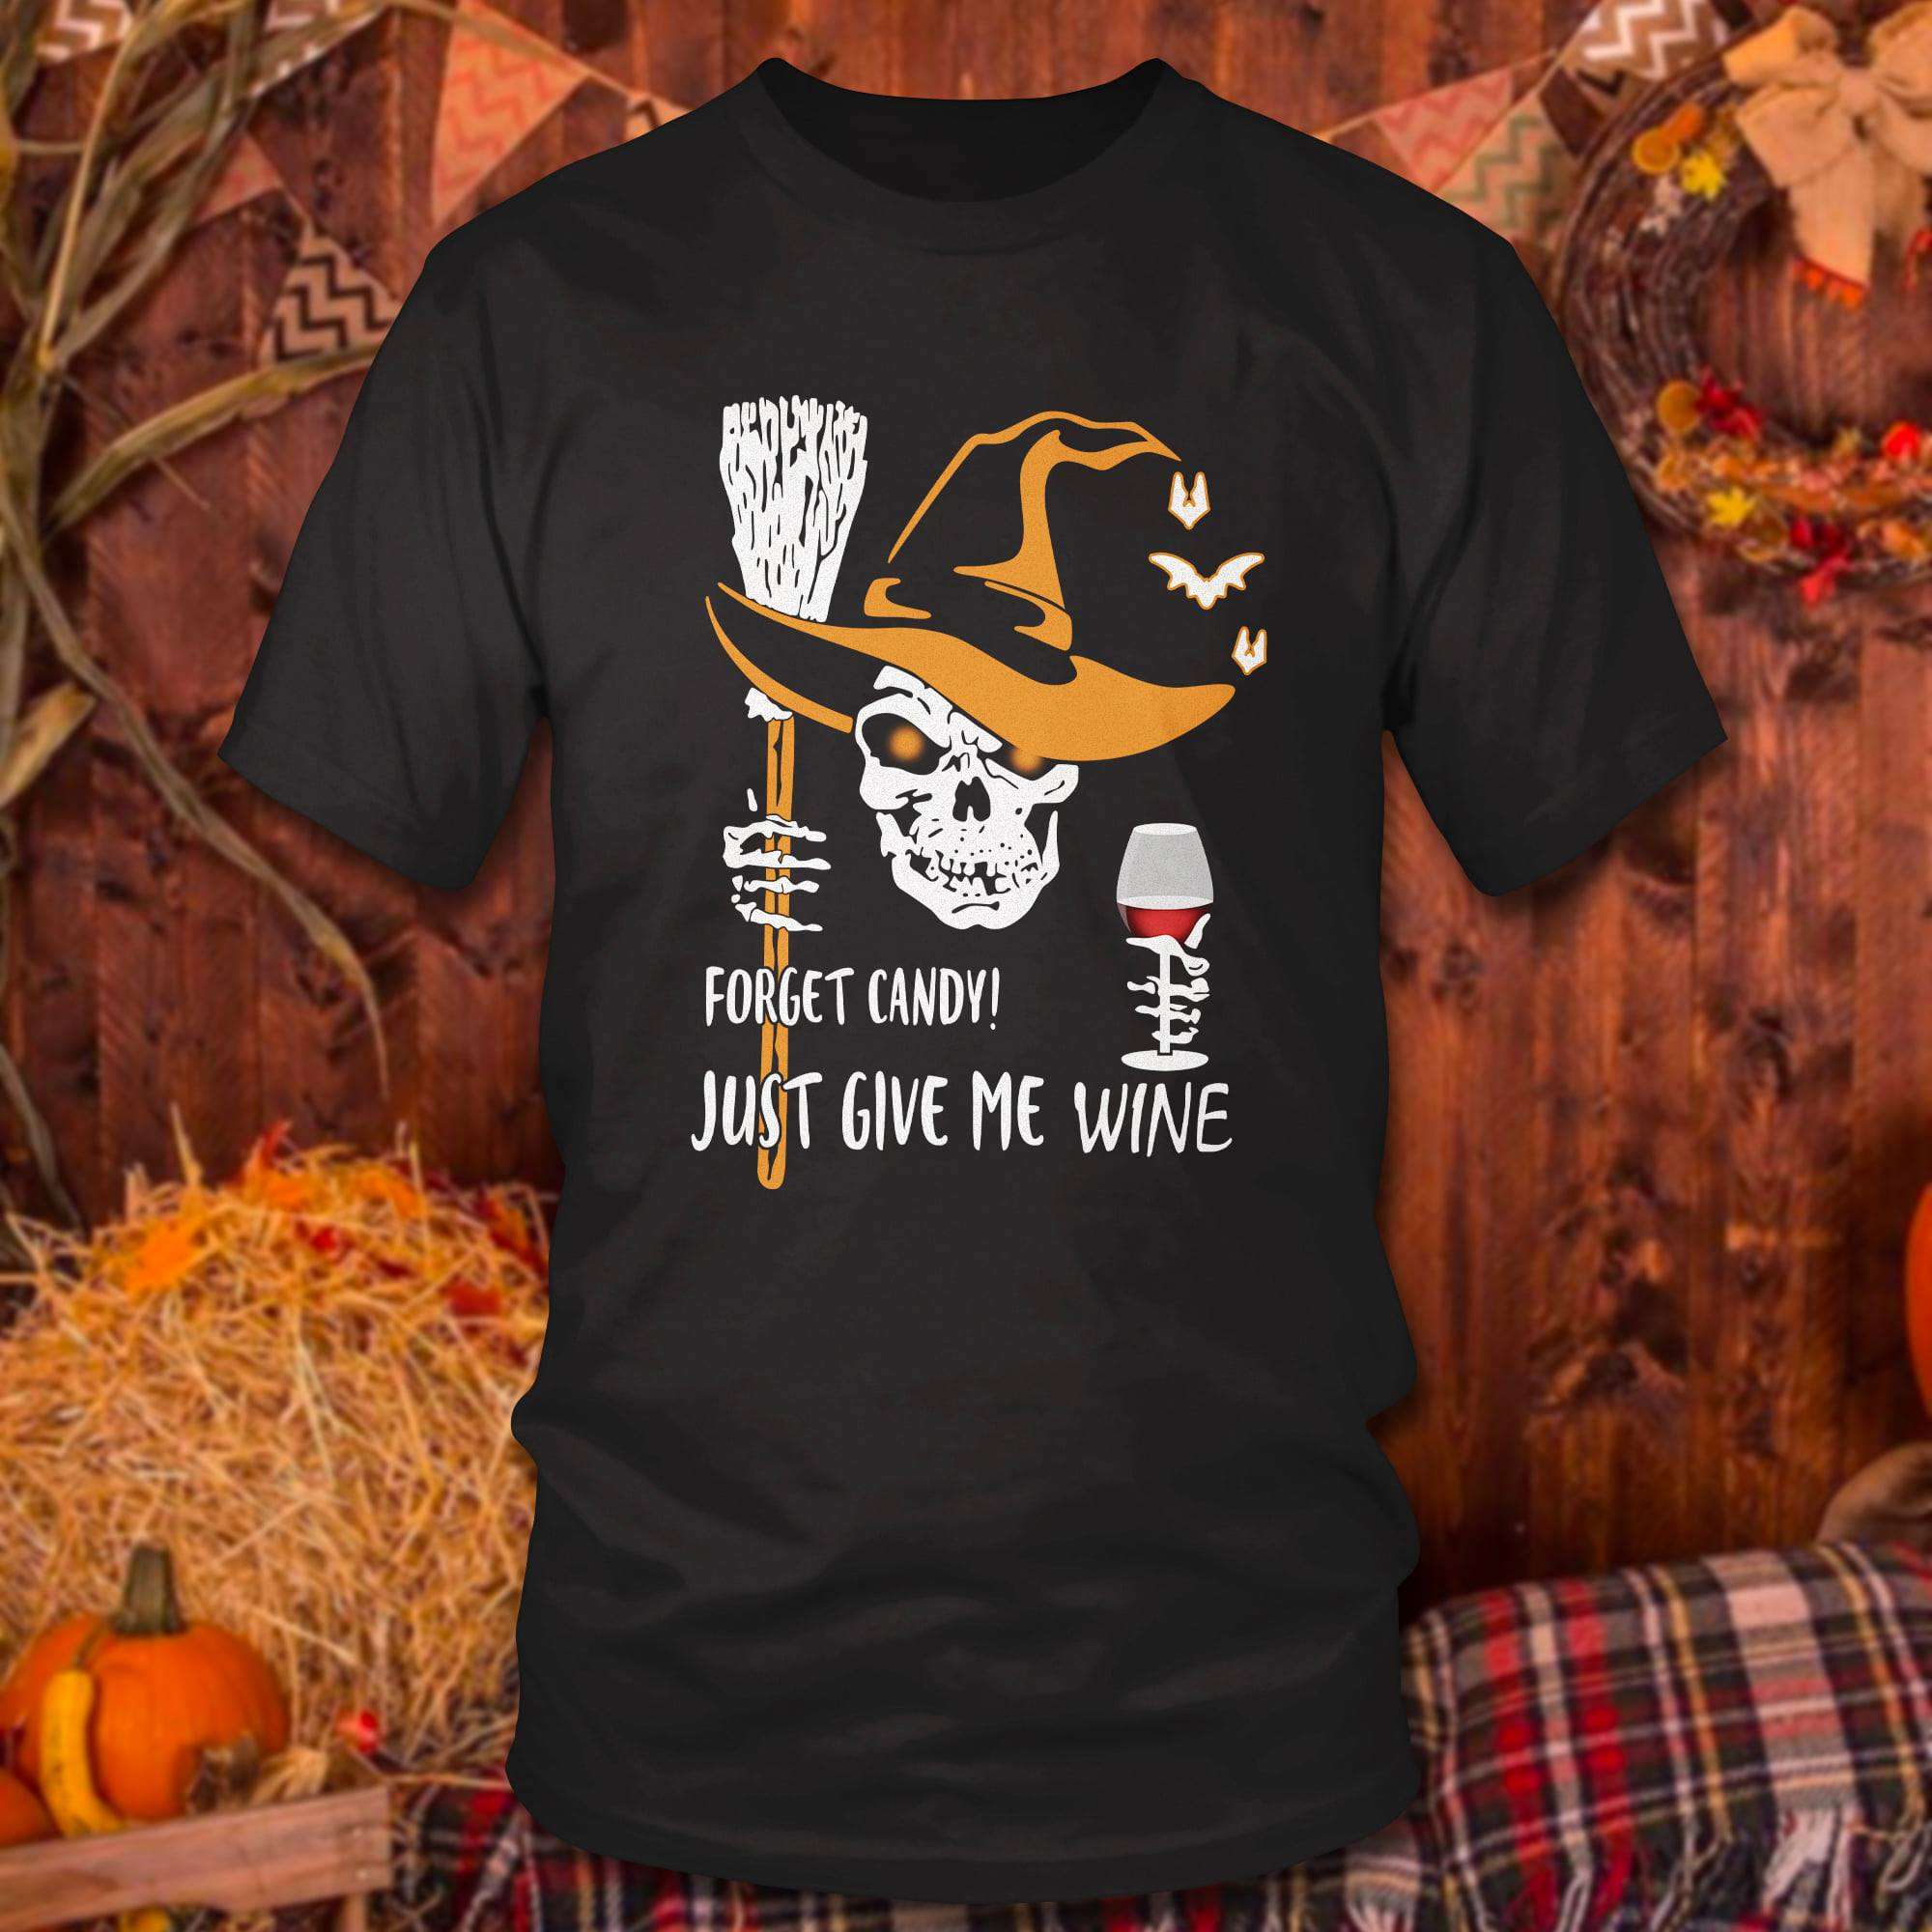 Forget candy, just give me wine - Witch and wine, Halloween skull witch